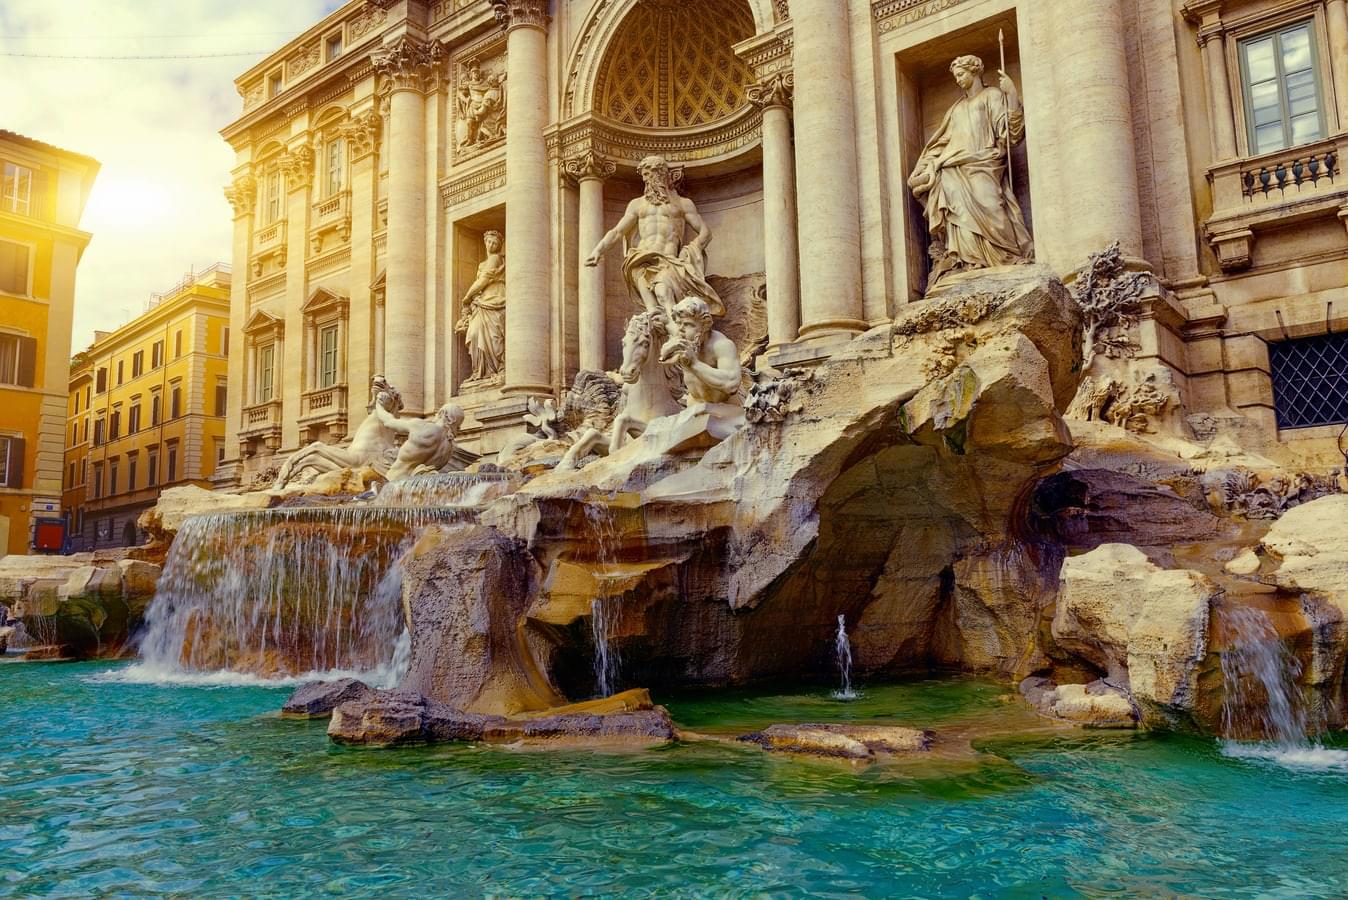 Trevi Fountain Overview